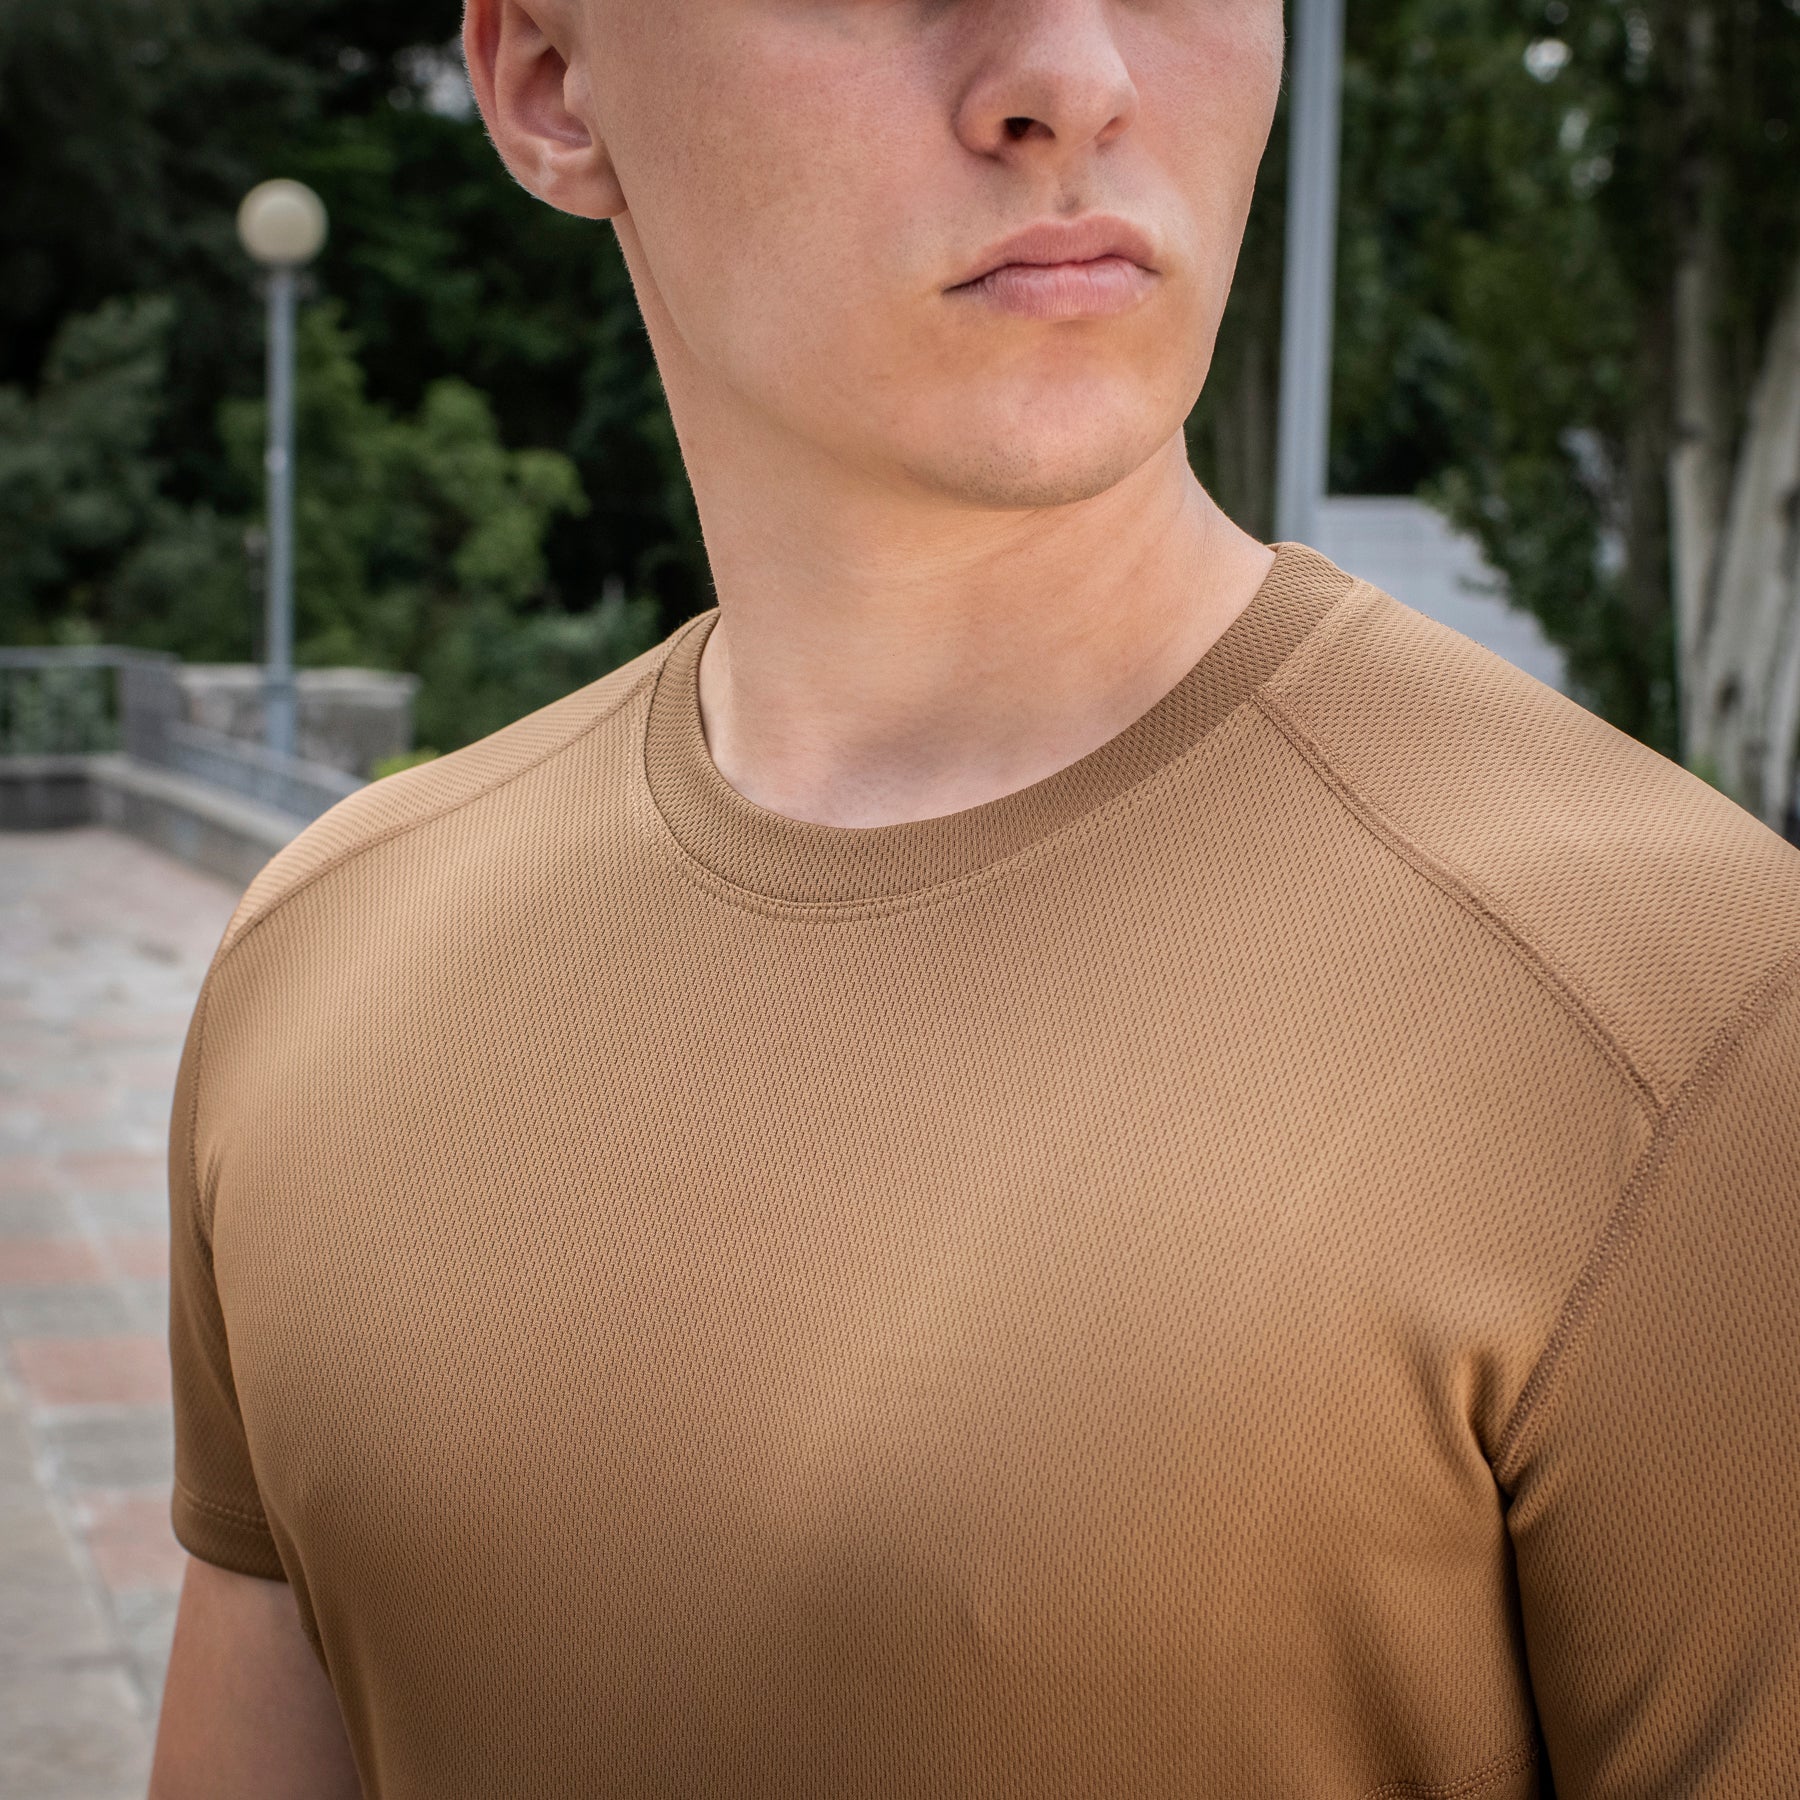 M-Tac Sweat-Wicking T-shirt  Athletic with Loop Panels